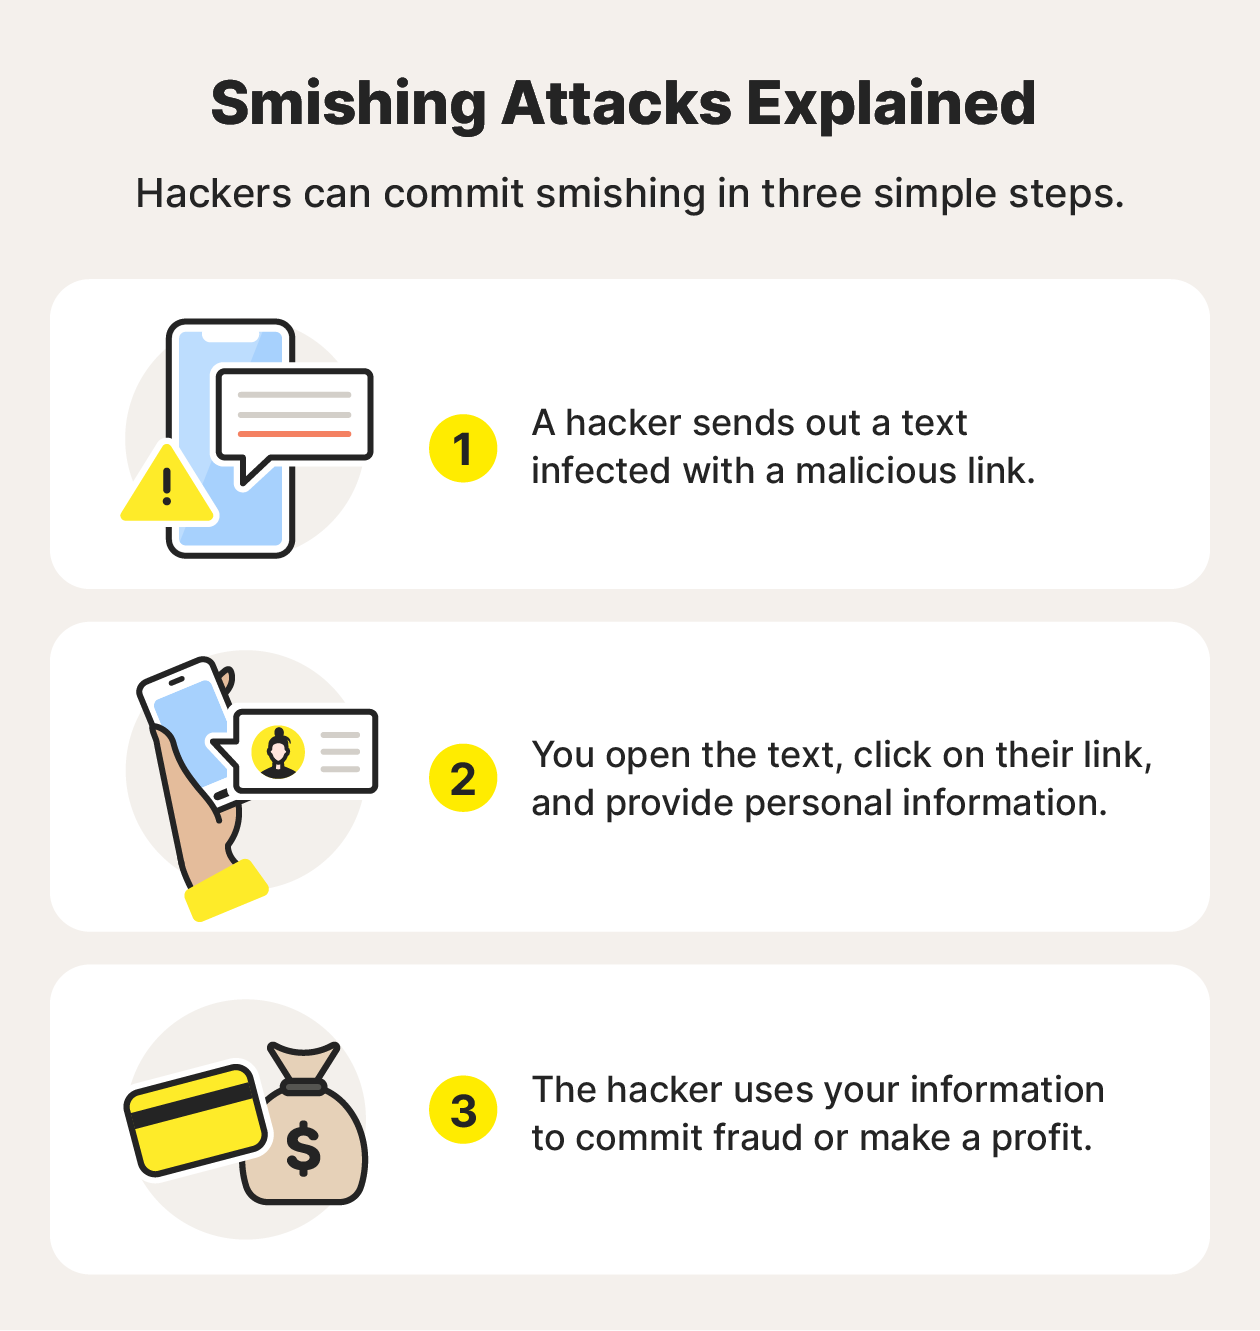 Hackers can commit smishing attacks in three simple steps.